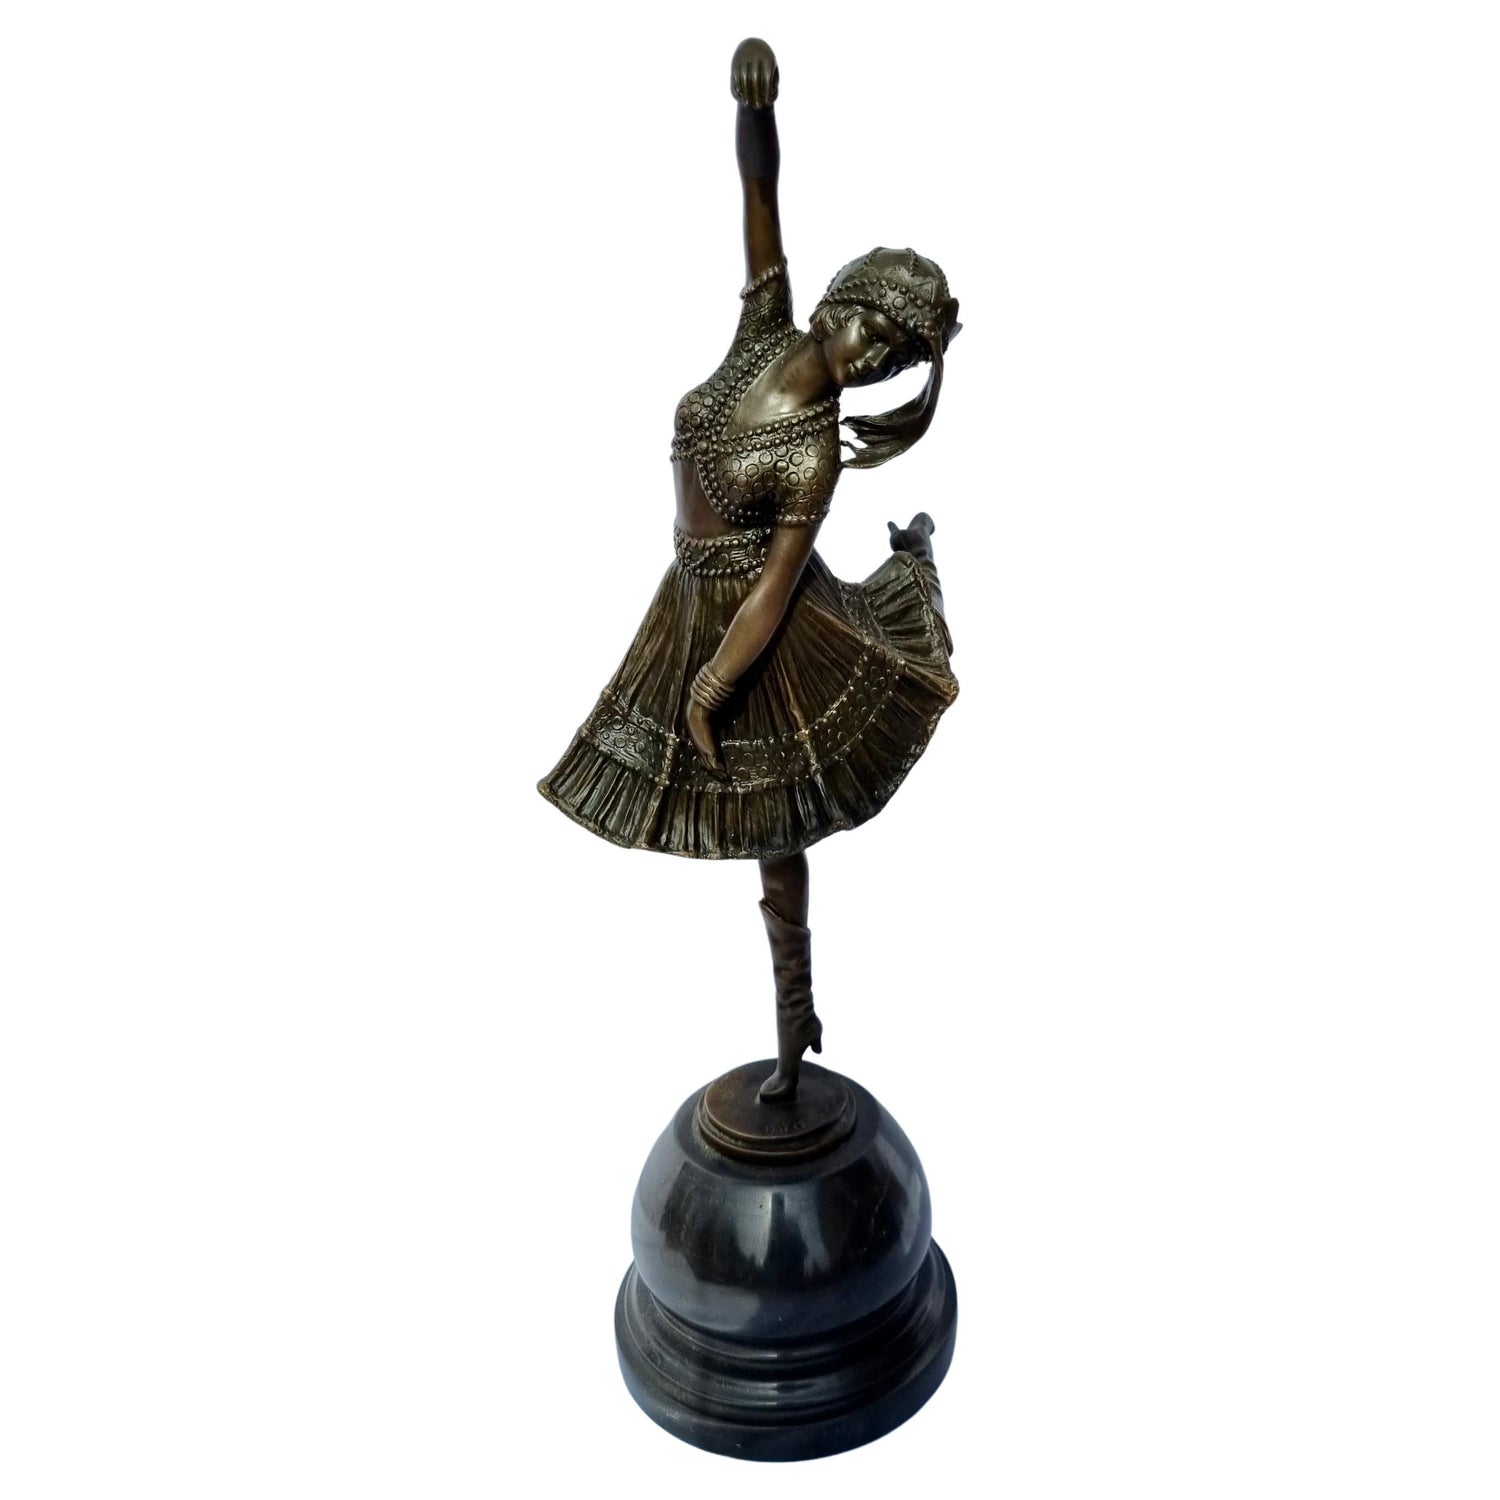 Art Deco 20th Century Bronze Entitled "Favourite Unveiled" by Demetre  Chiparus For Sale at 1stDibs